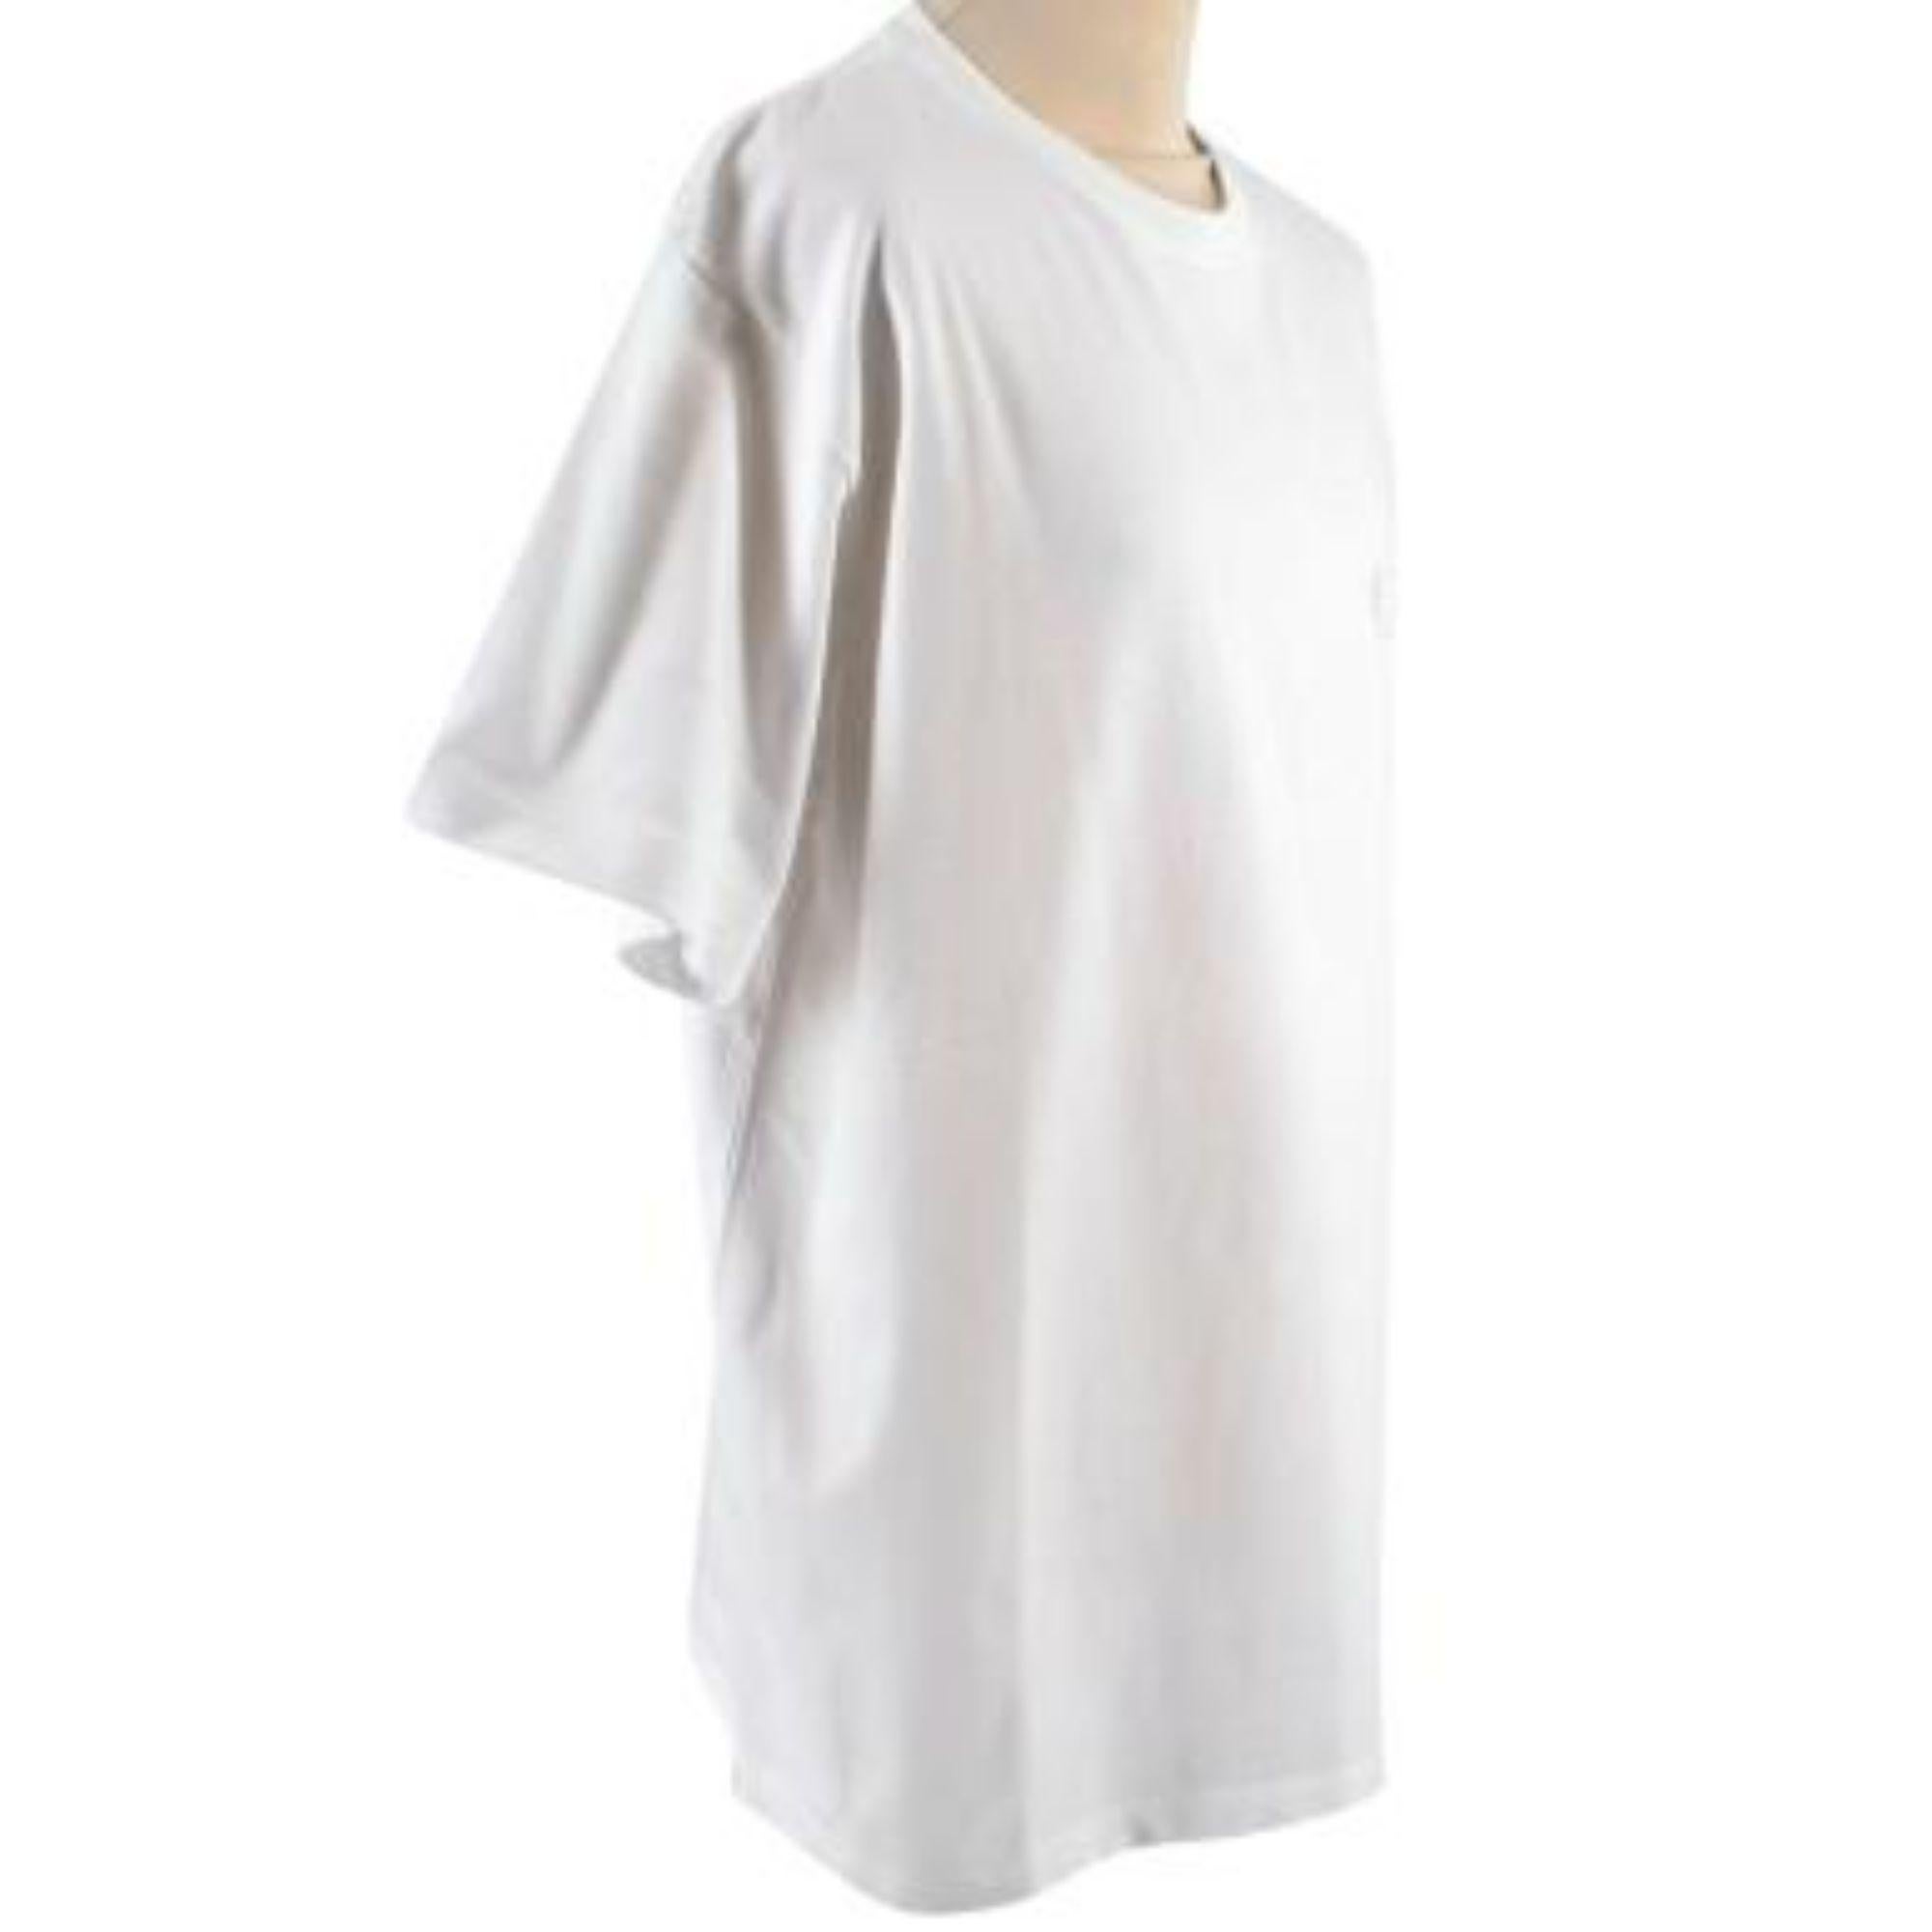 Dior Homme White CD Embroidered Cotton T-shirt In Excellent Condition For Sale In London, GB